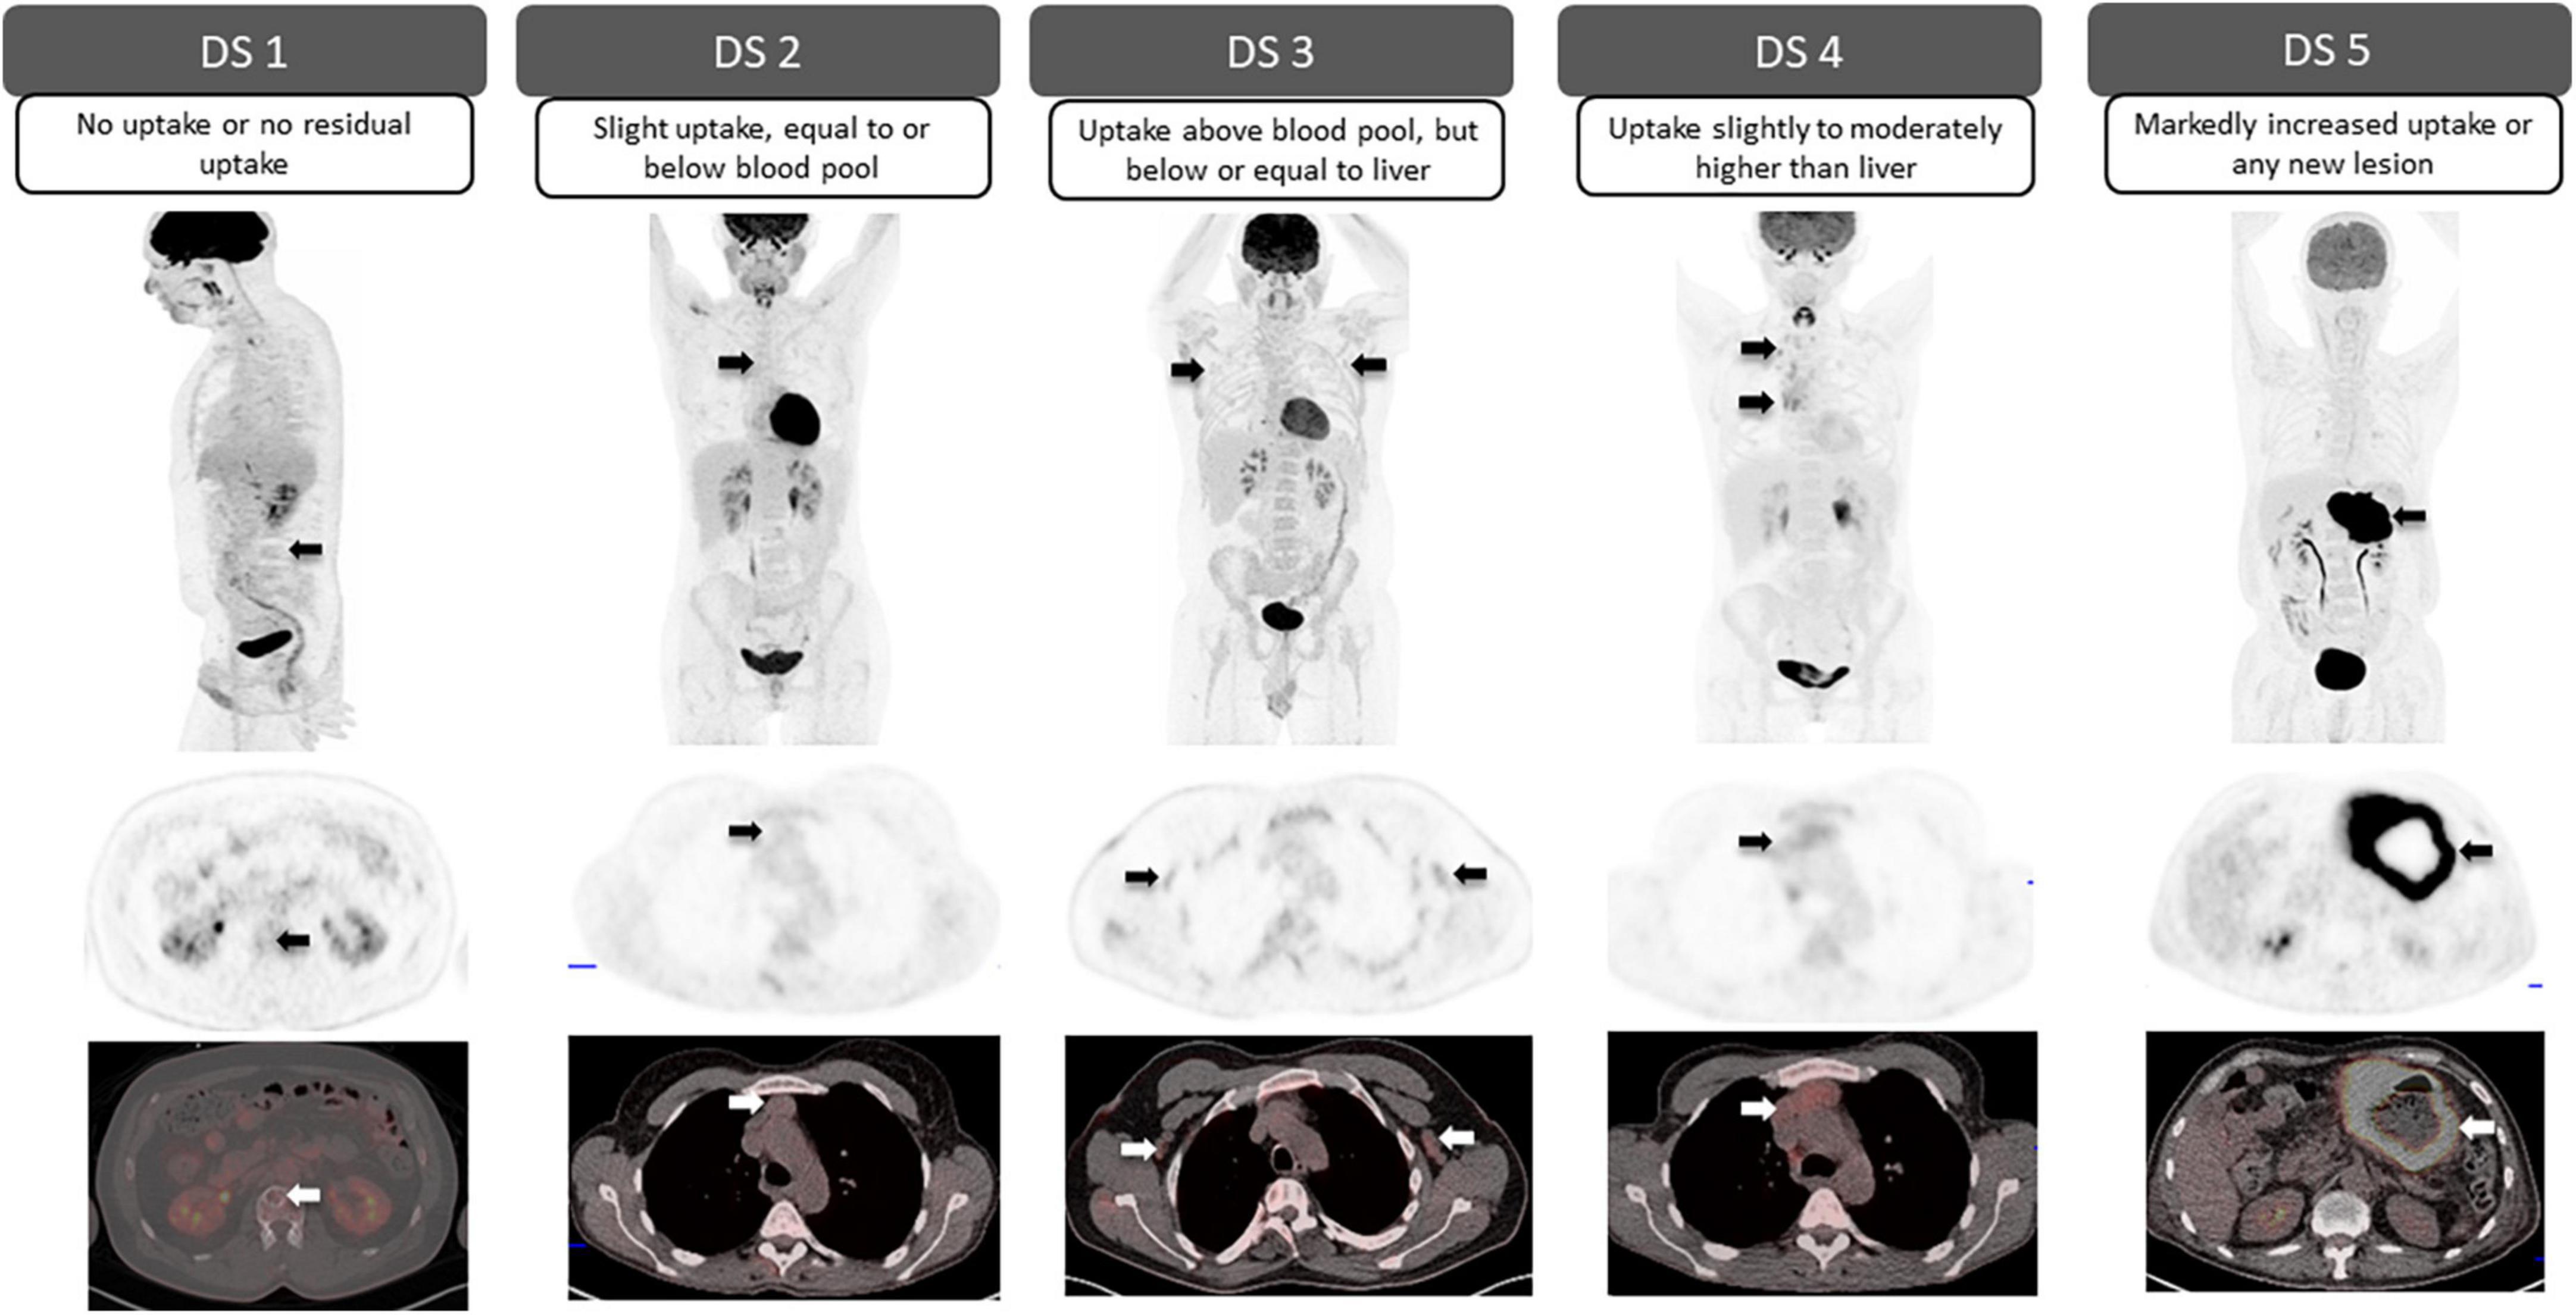 Standardized classification schemes in reporting oncologic PET/CT